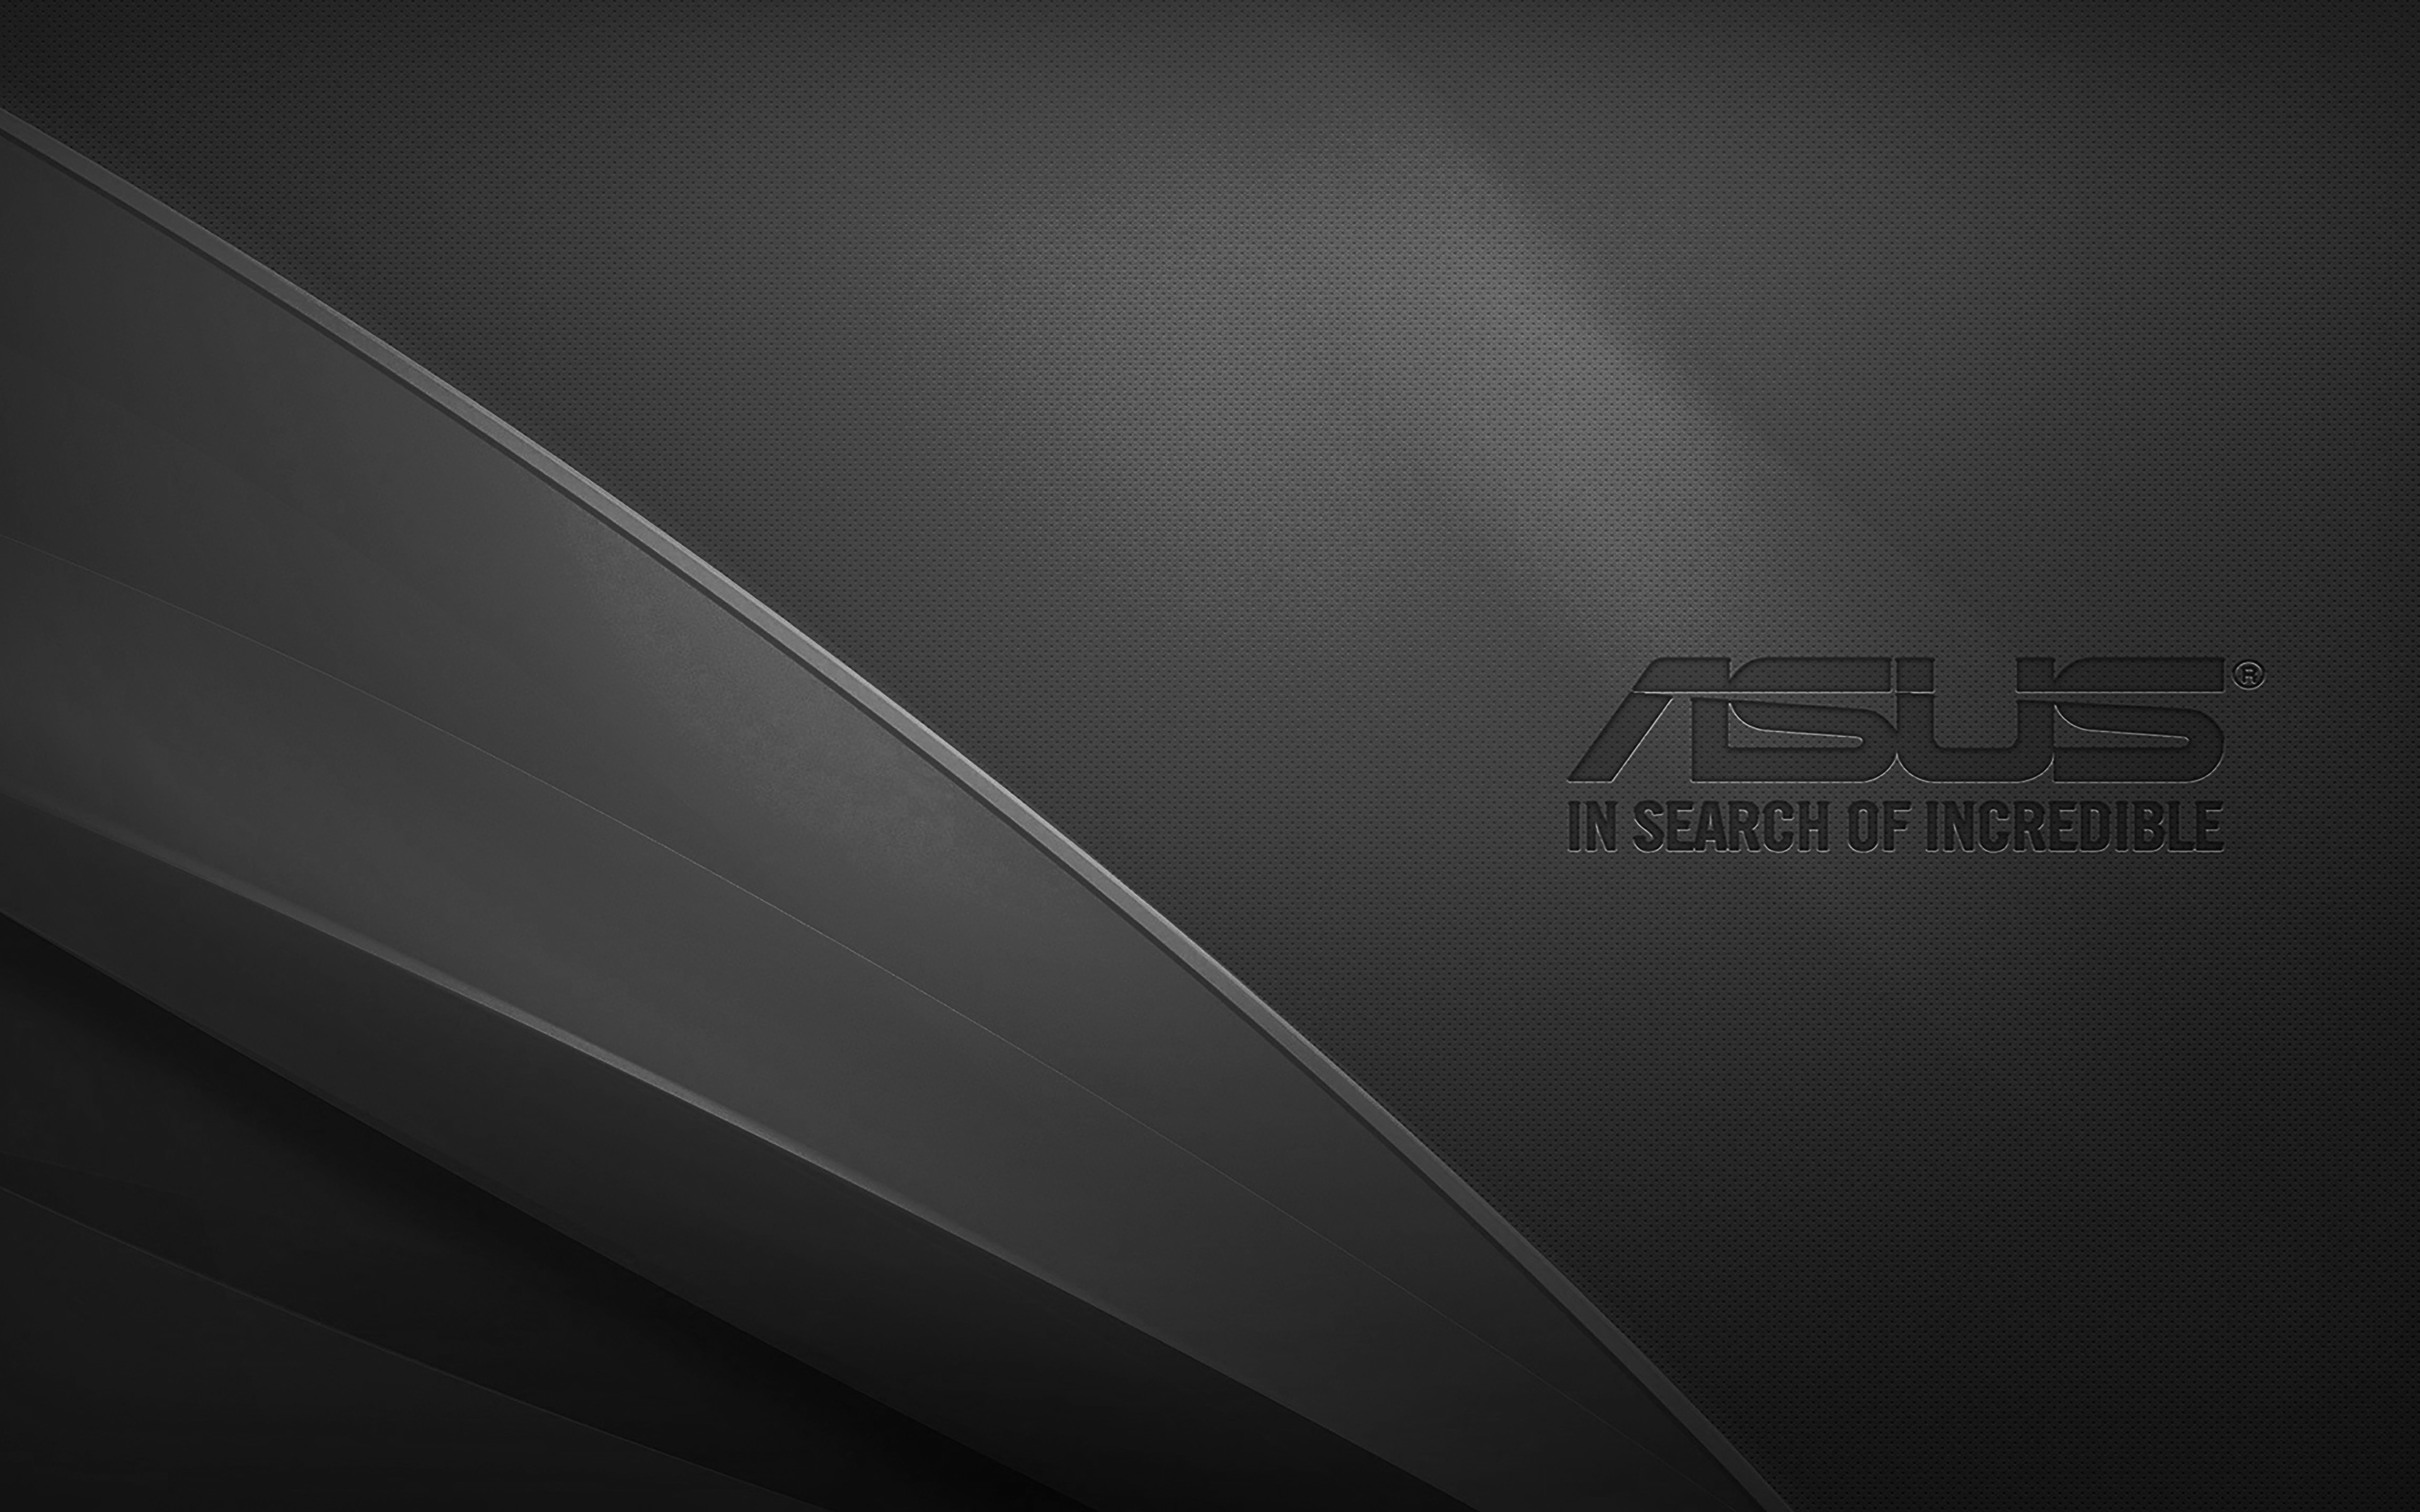 Download wallpaper Asus black logo, 4K, creative, black wavy background, Asus logo, artwork, Asus for desktop with resolution 3840x2400. High Quality HD picture wallpaper